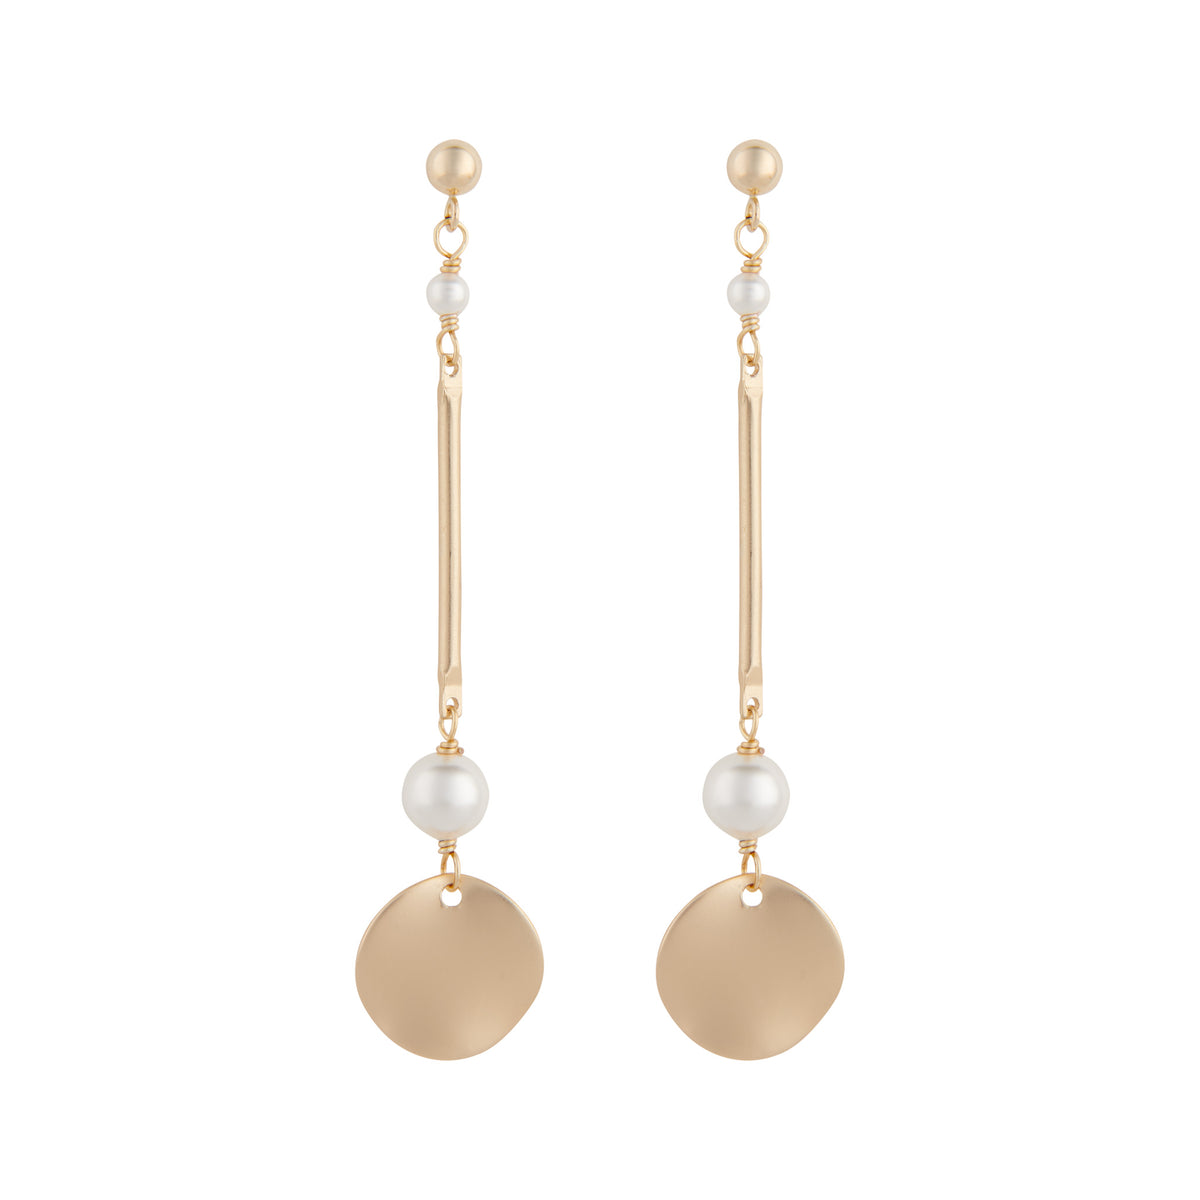 Matte gold plated bar disc earrings with white pearls by vivien walsh